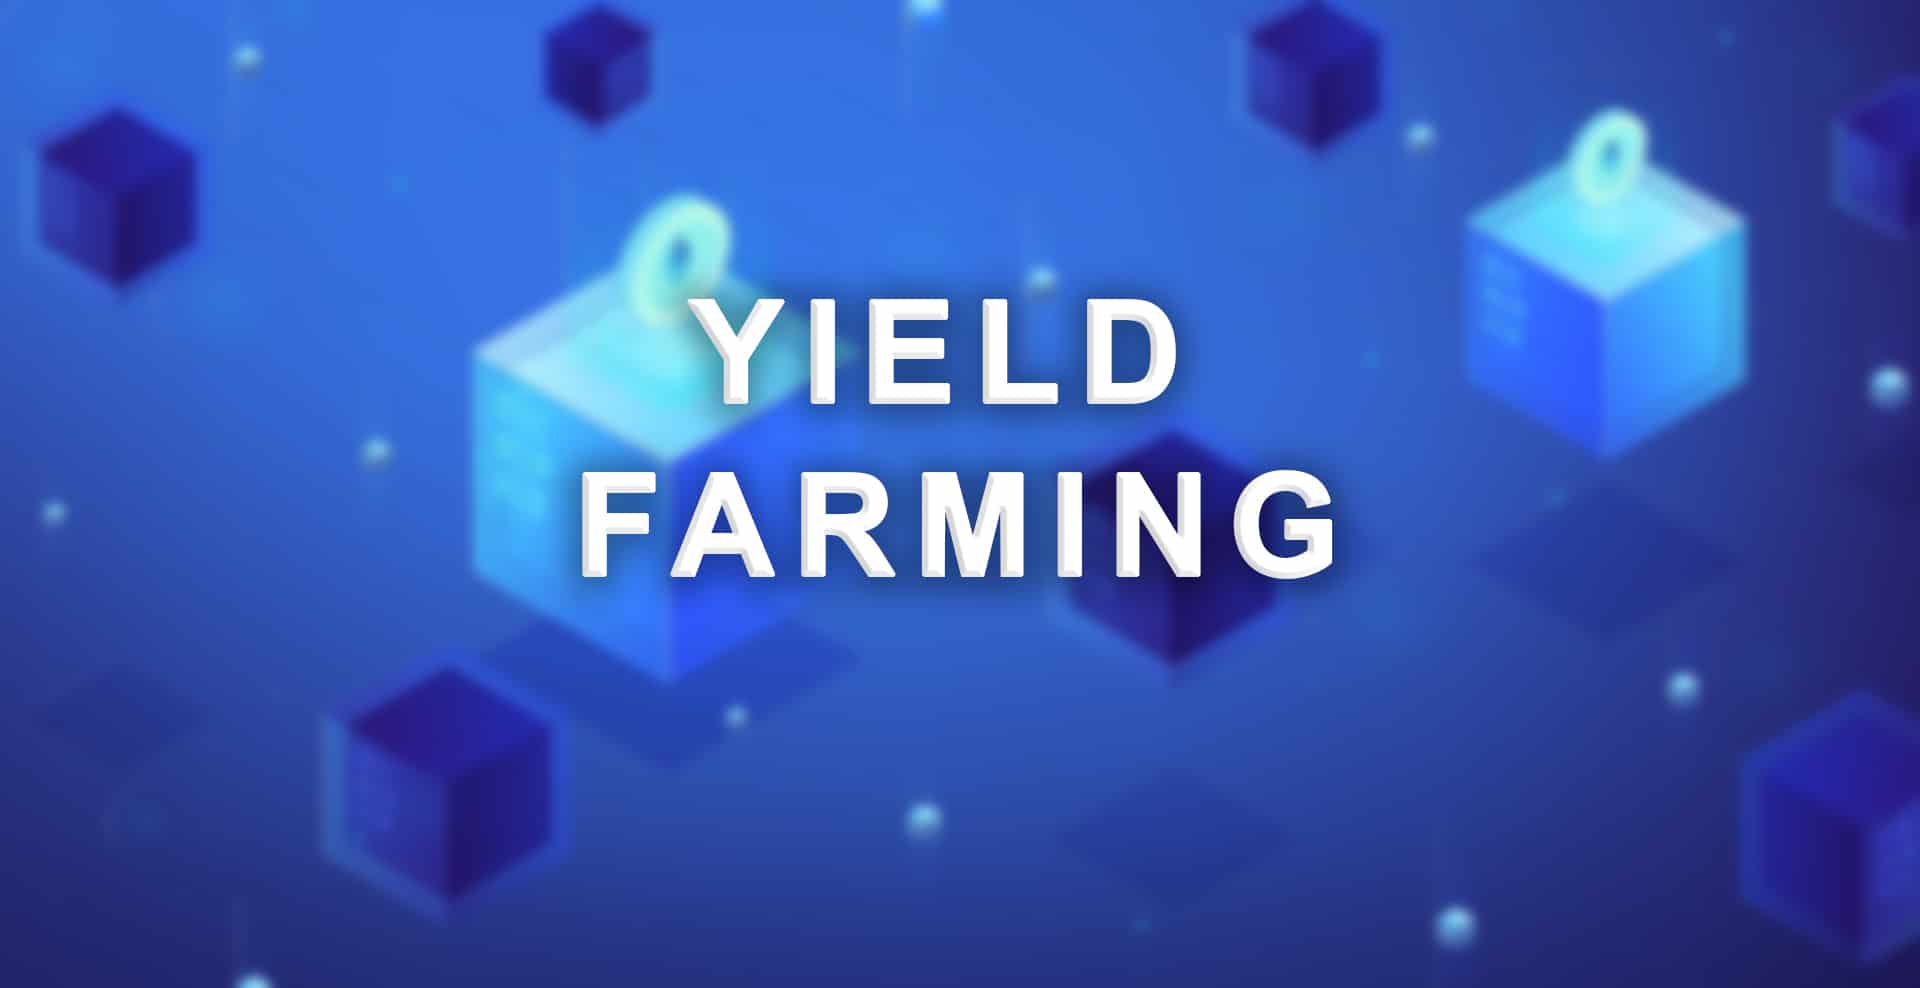 What is yield farming